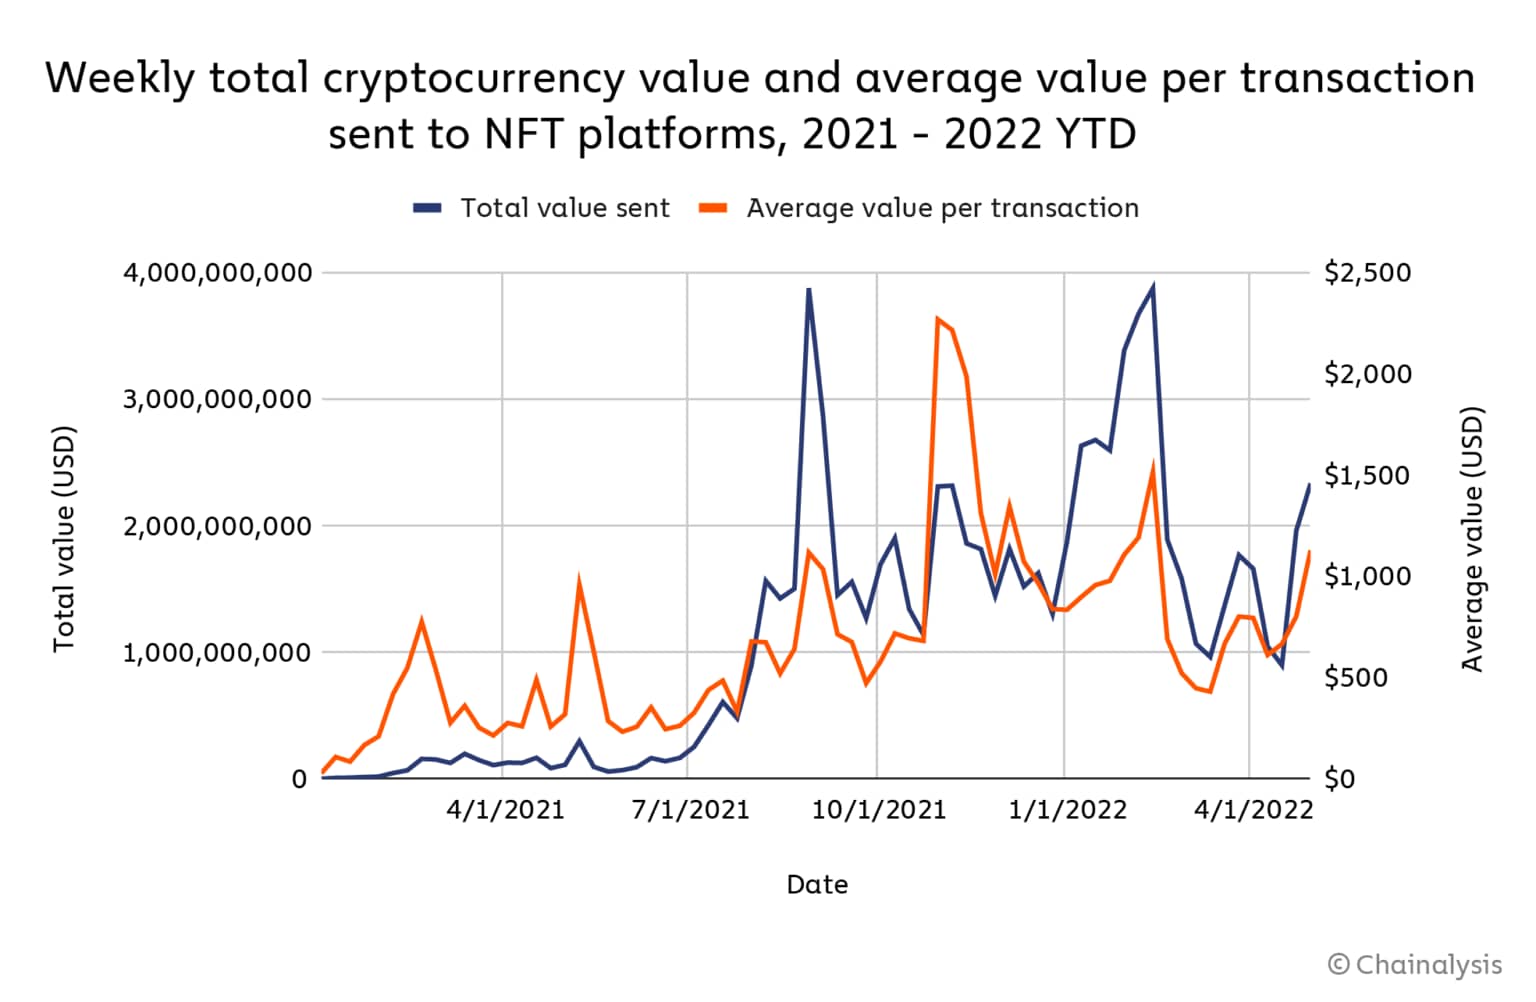 Chainalysis Weekly total cryptocurrency value and avarage transaction